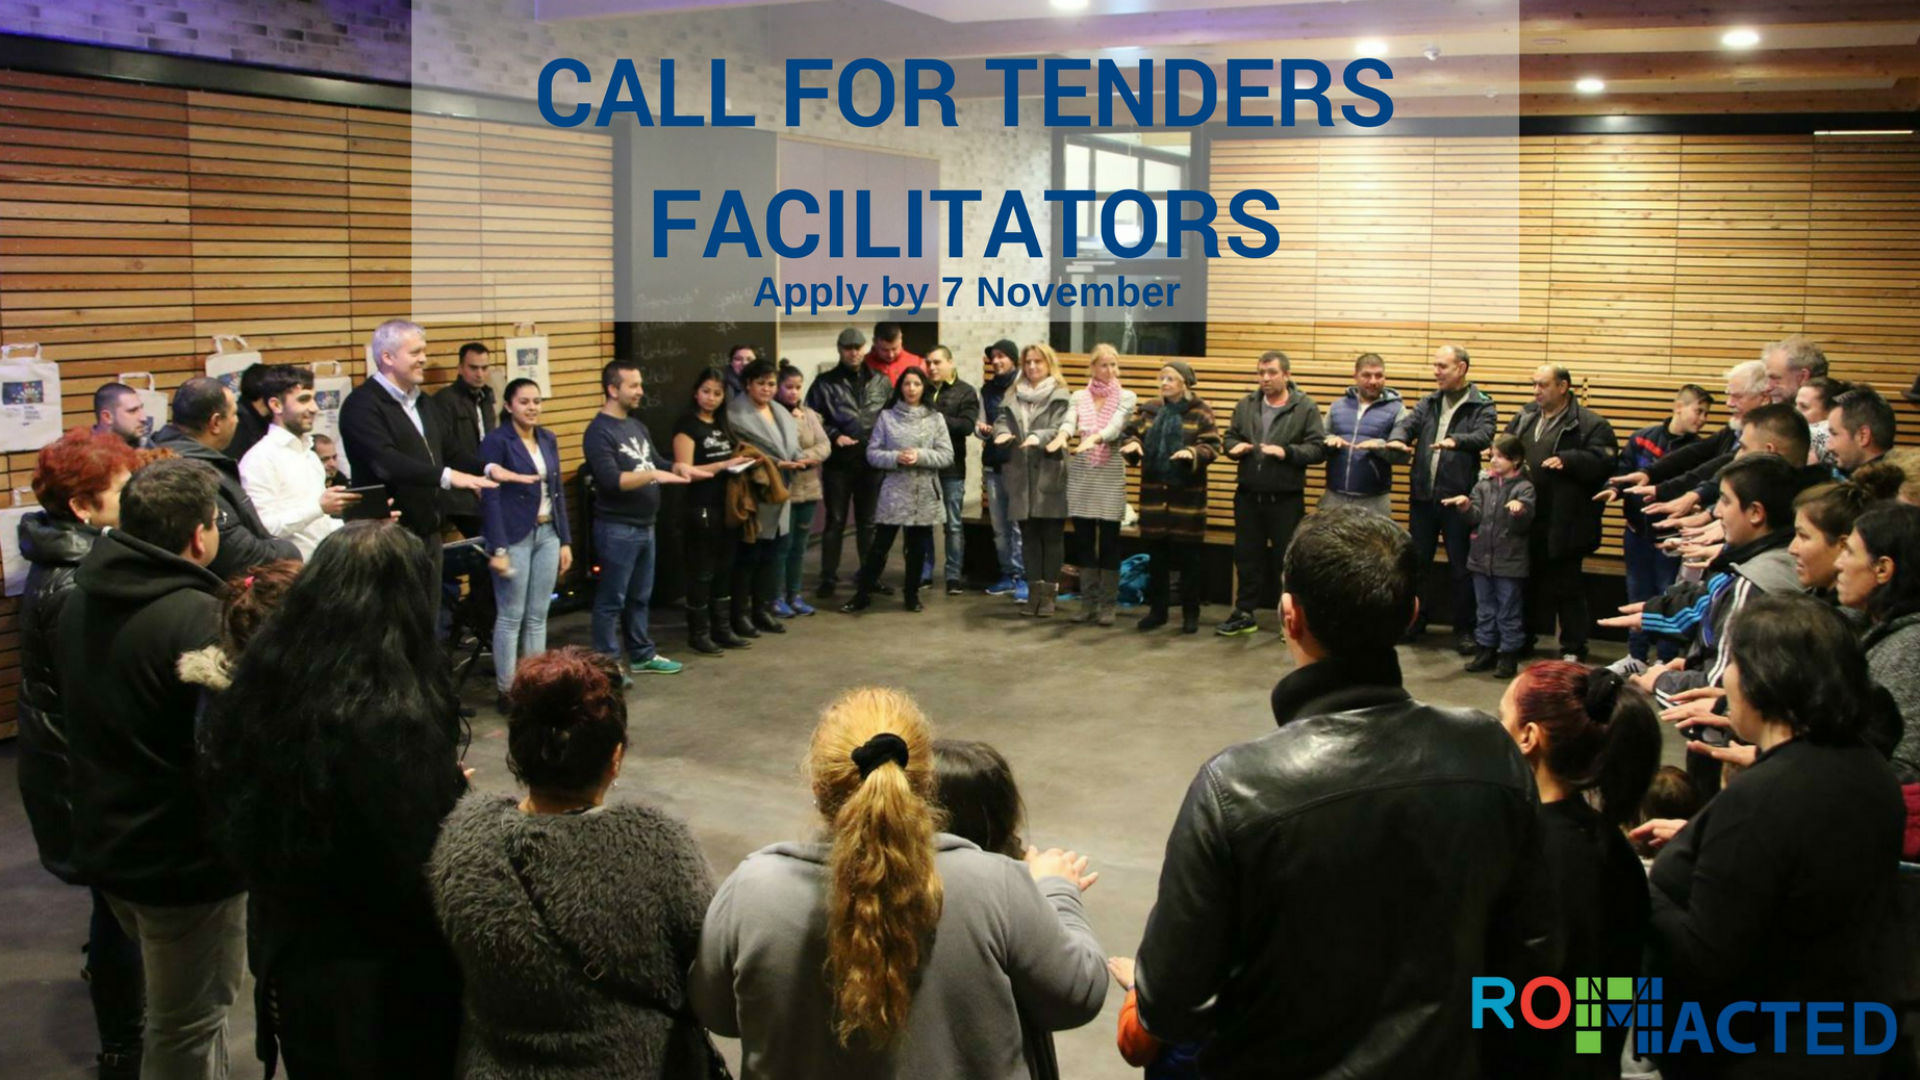 ROMACTED CALL FOR TENDERS FOR A POOL OF FACILITATORS